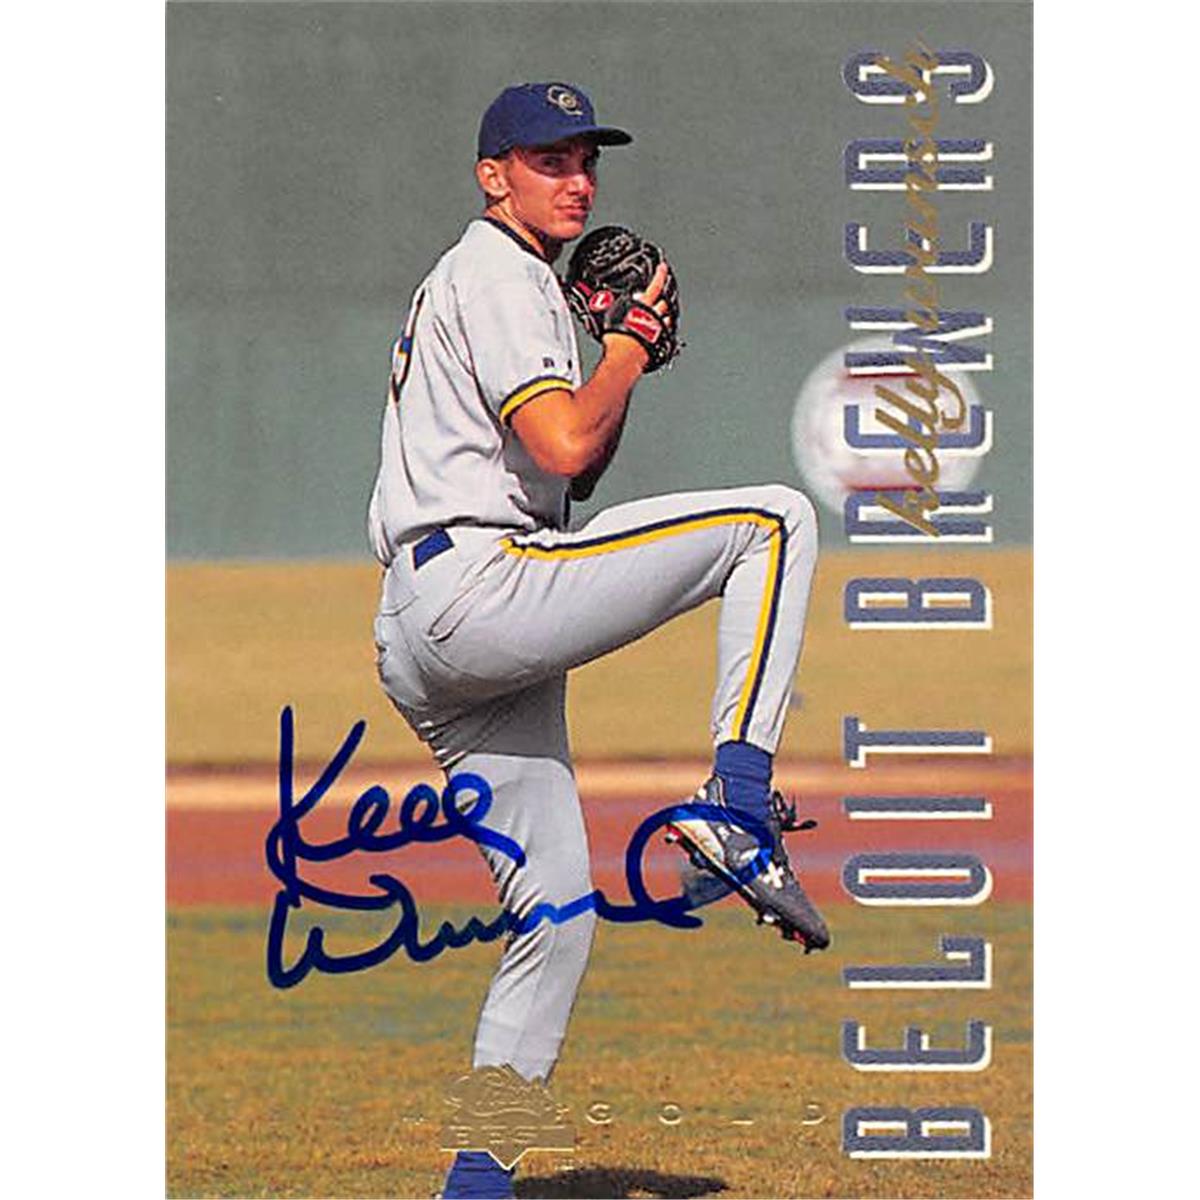 Autograph Warehouse 366519 Kelly Wunsch Autographed Baseball Card - 1994 Classic Best Gold Minor League Rookie No. 20